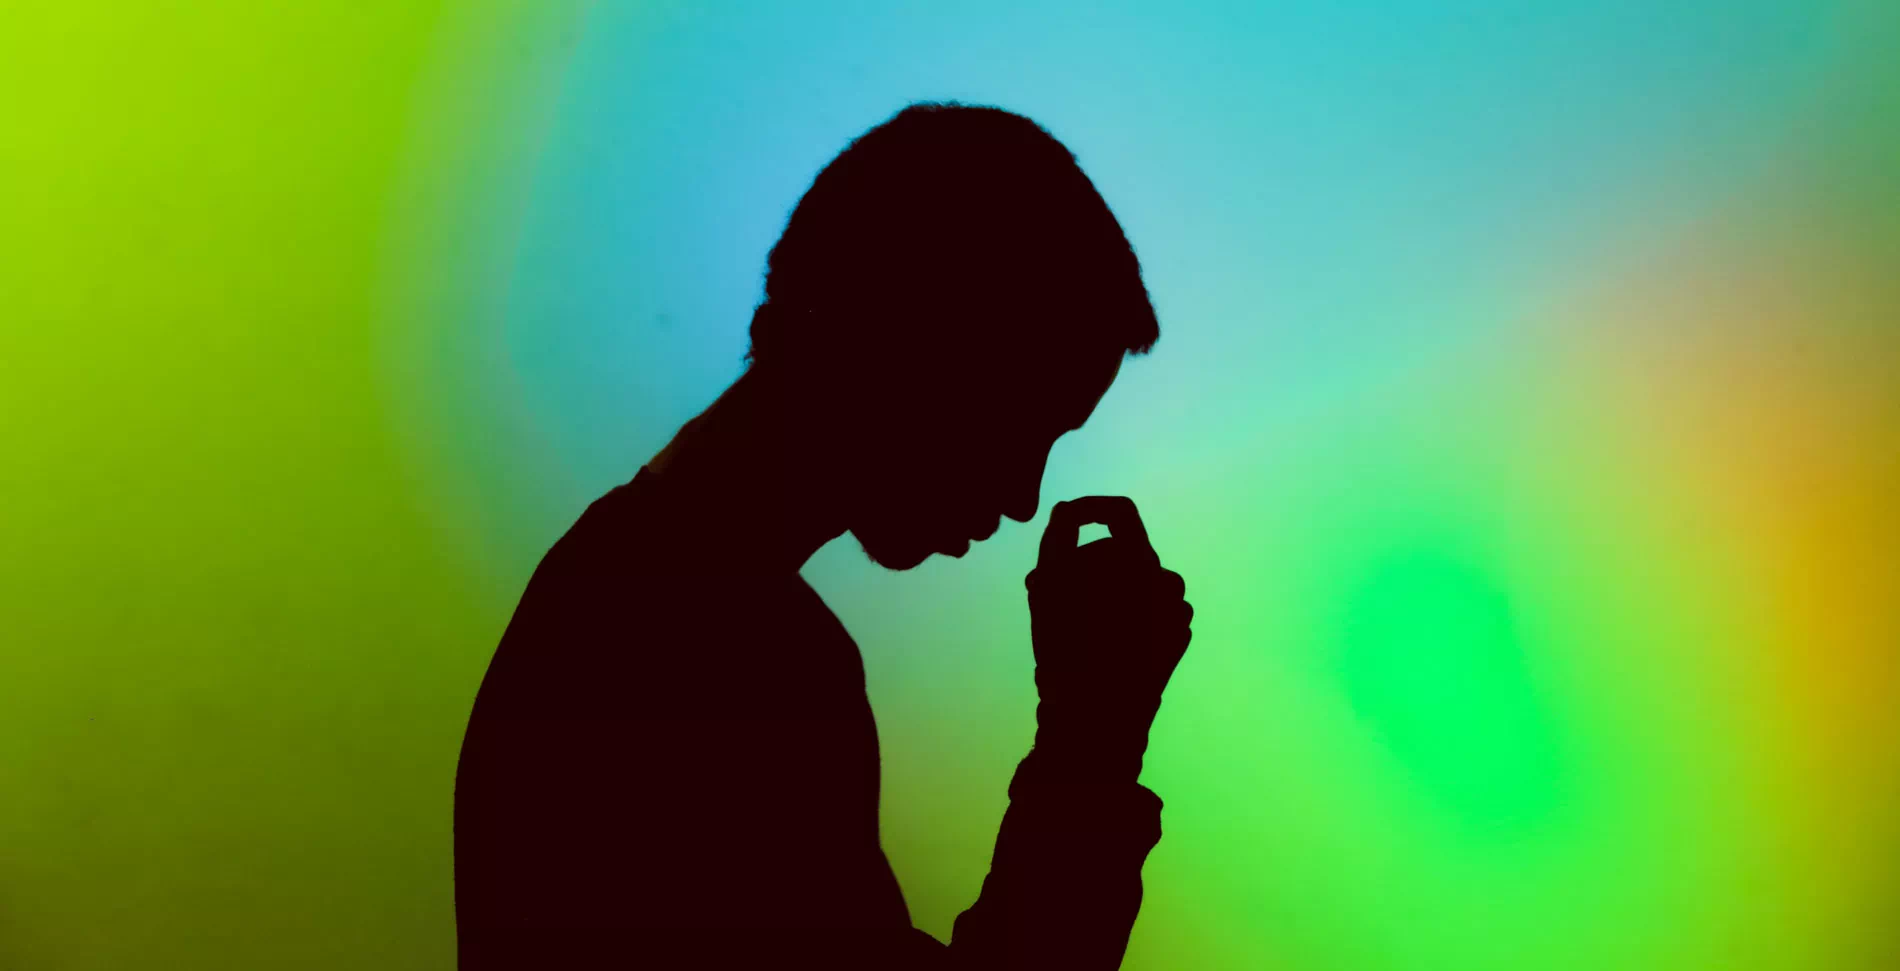 silhouette image of man with financial stress